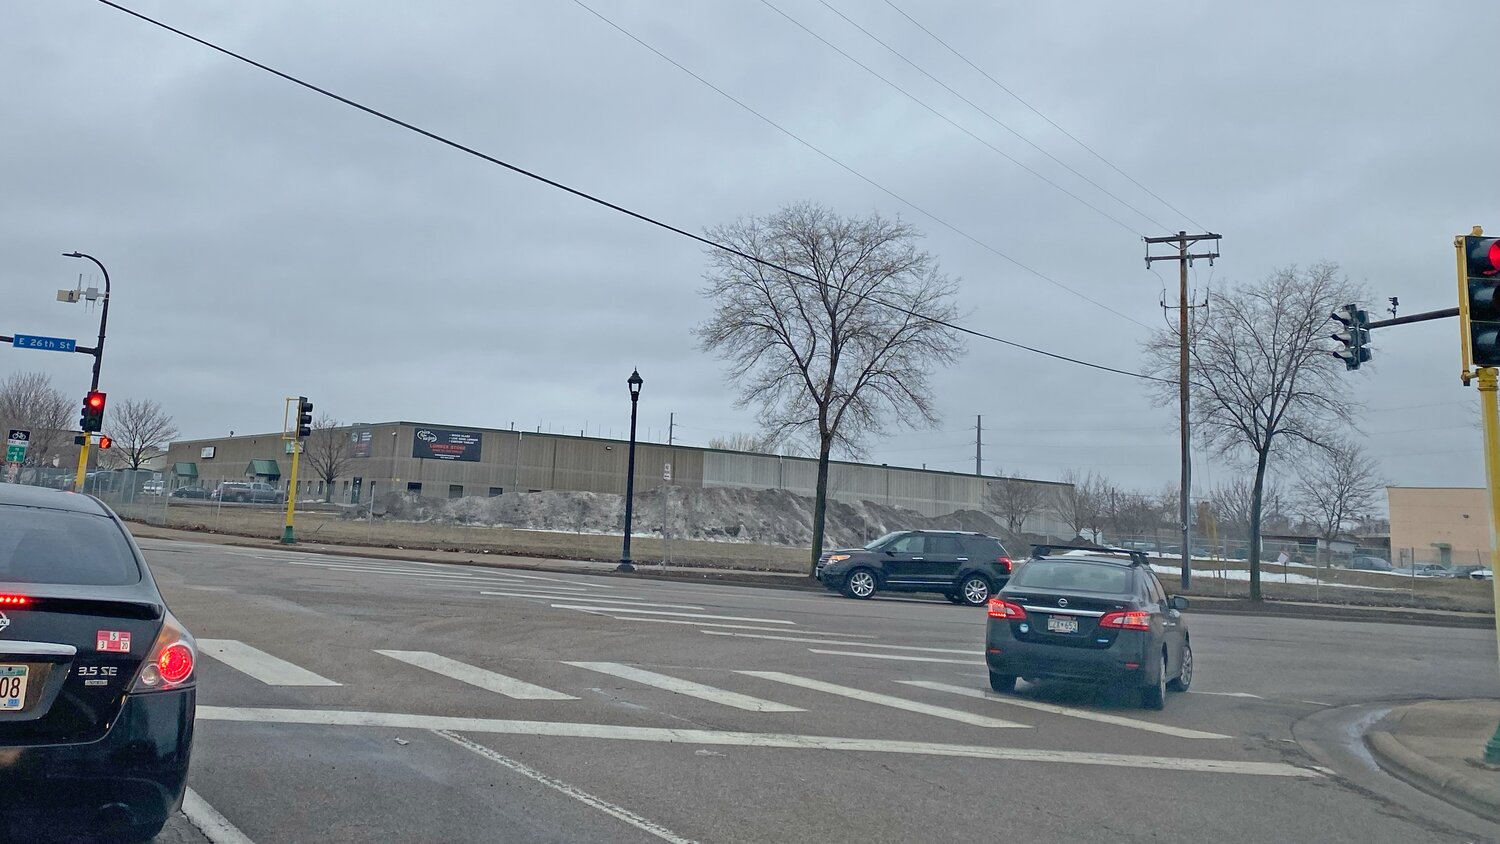 Mayor Jacob Frey has asked council members to approve building a new structure at the city-owned site at 2600 Minnehaha to house the police from the 3rd precinct. (Photo submitted)